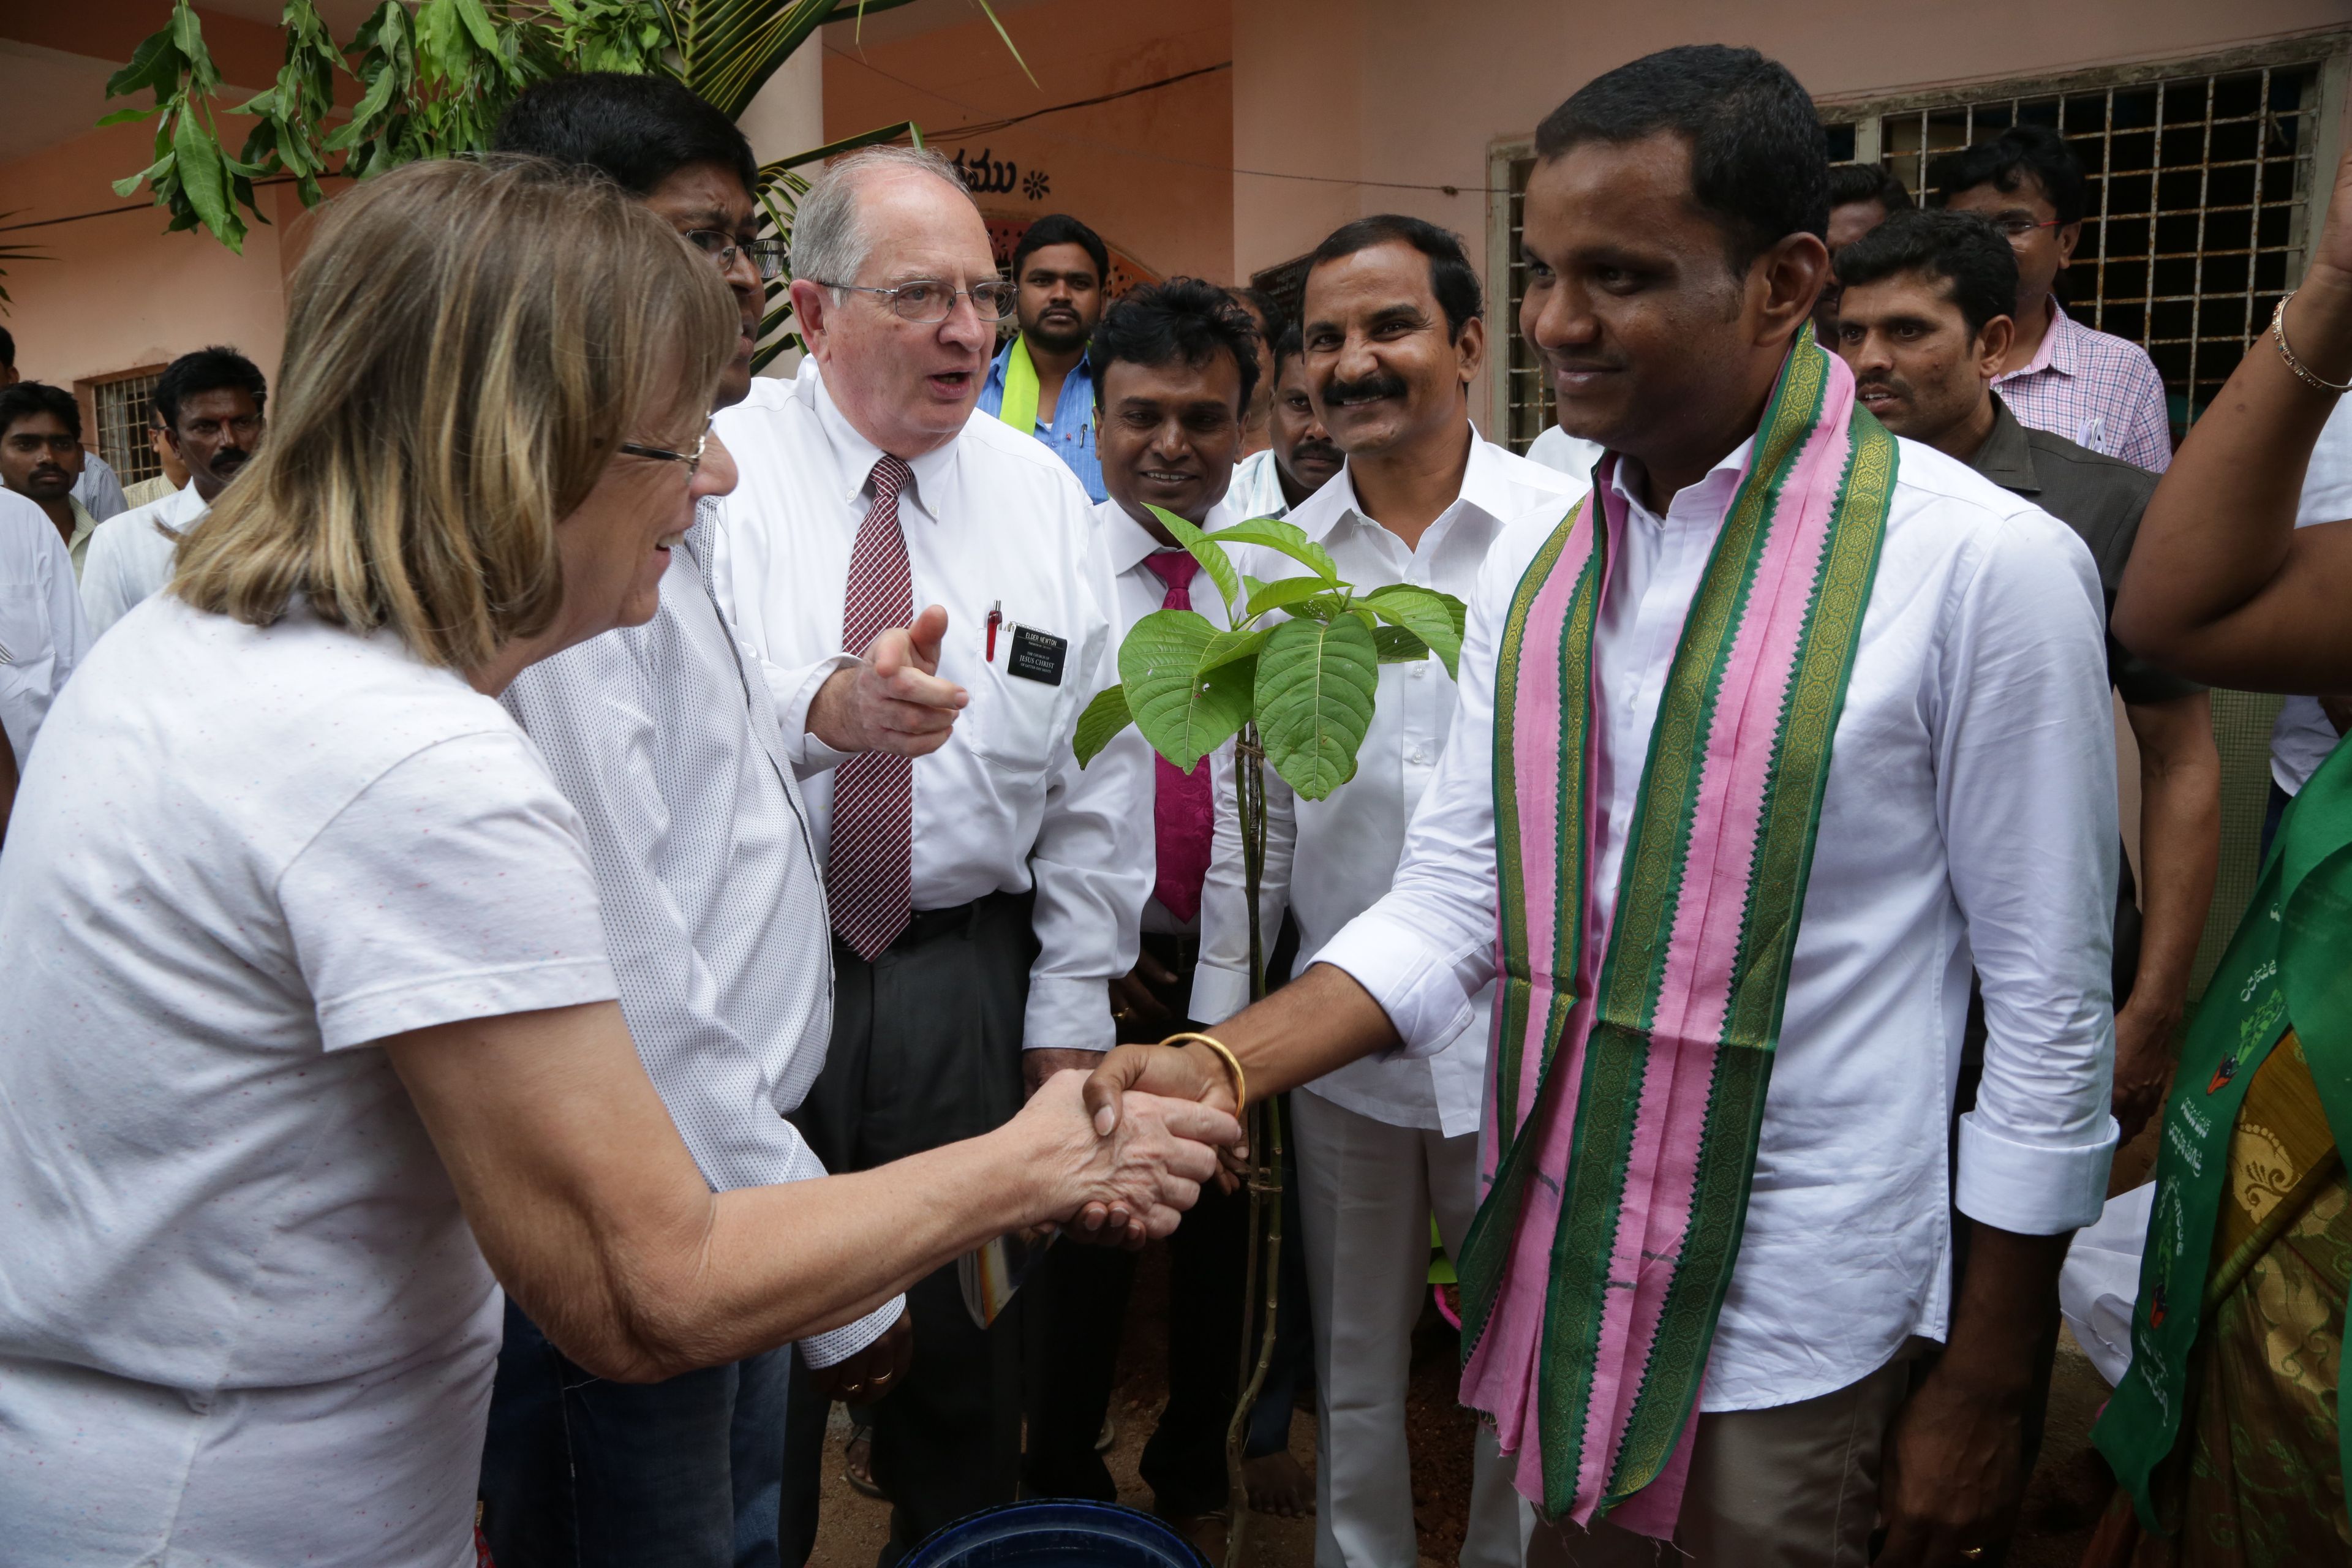 Humanitarian service missionaries meet with a group of people in India as part of the LDS Charities clean water initiative.